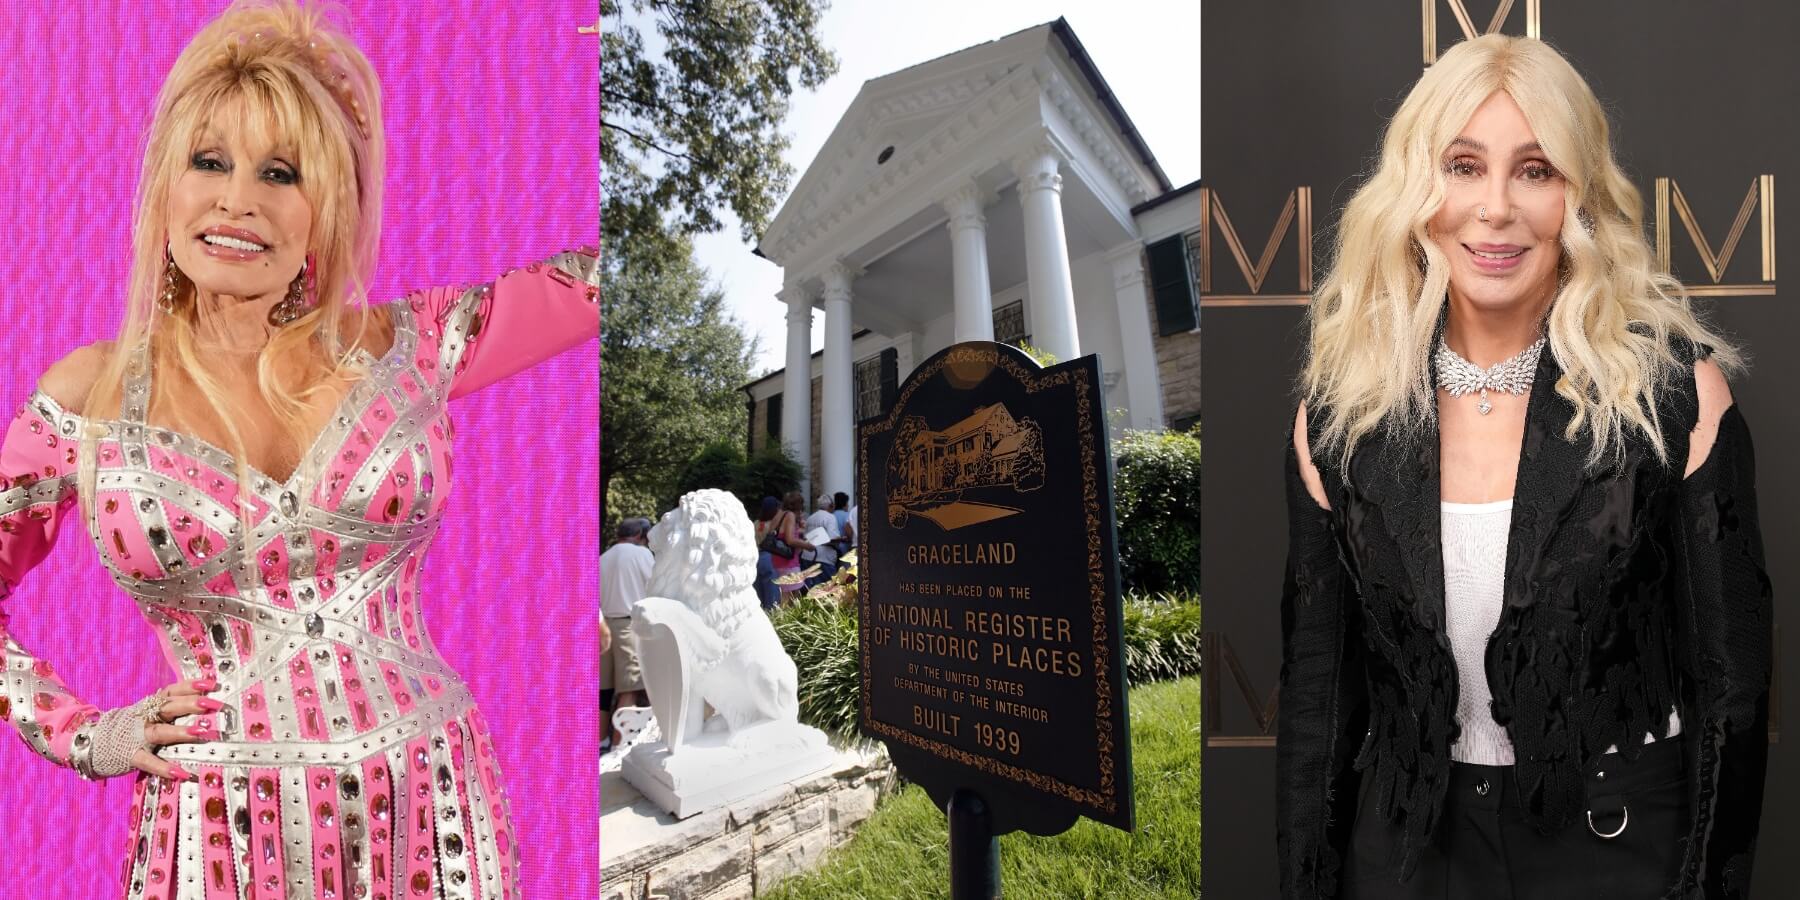 Dolly Parton, Graceland, Cher are in side-by-side photographs. They will be featured in 2023 holiday specials.